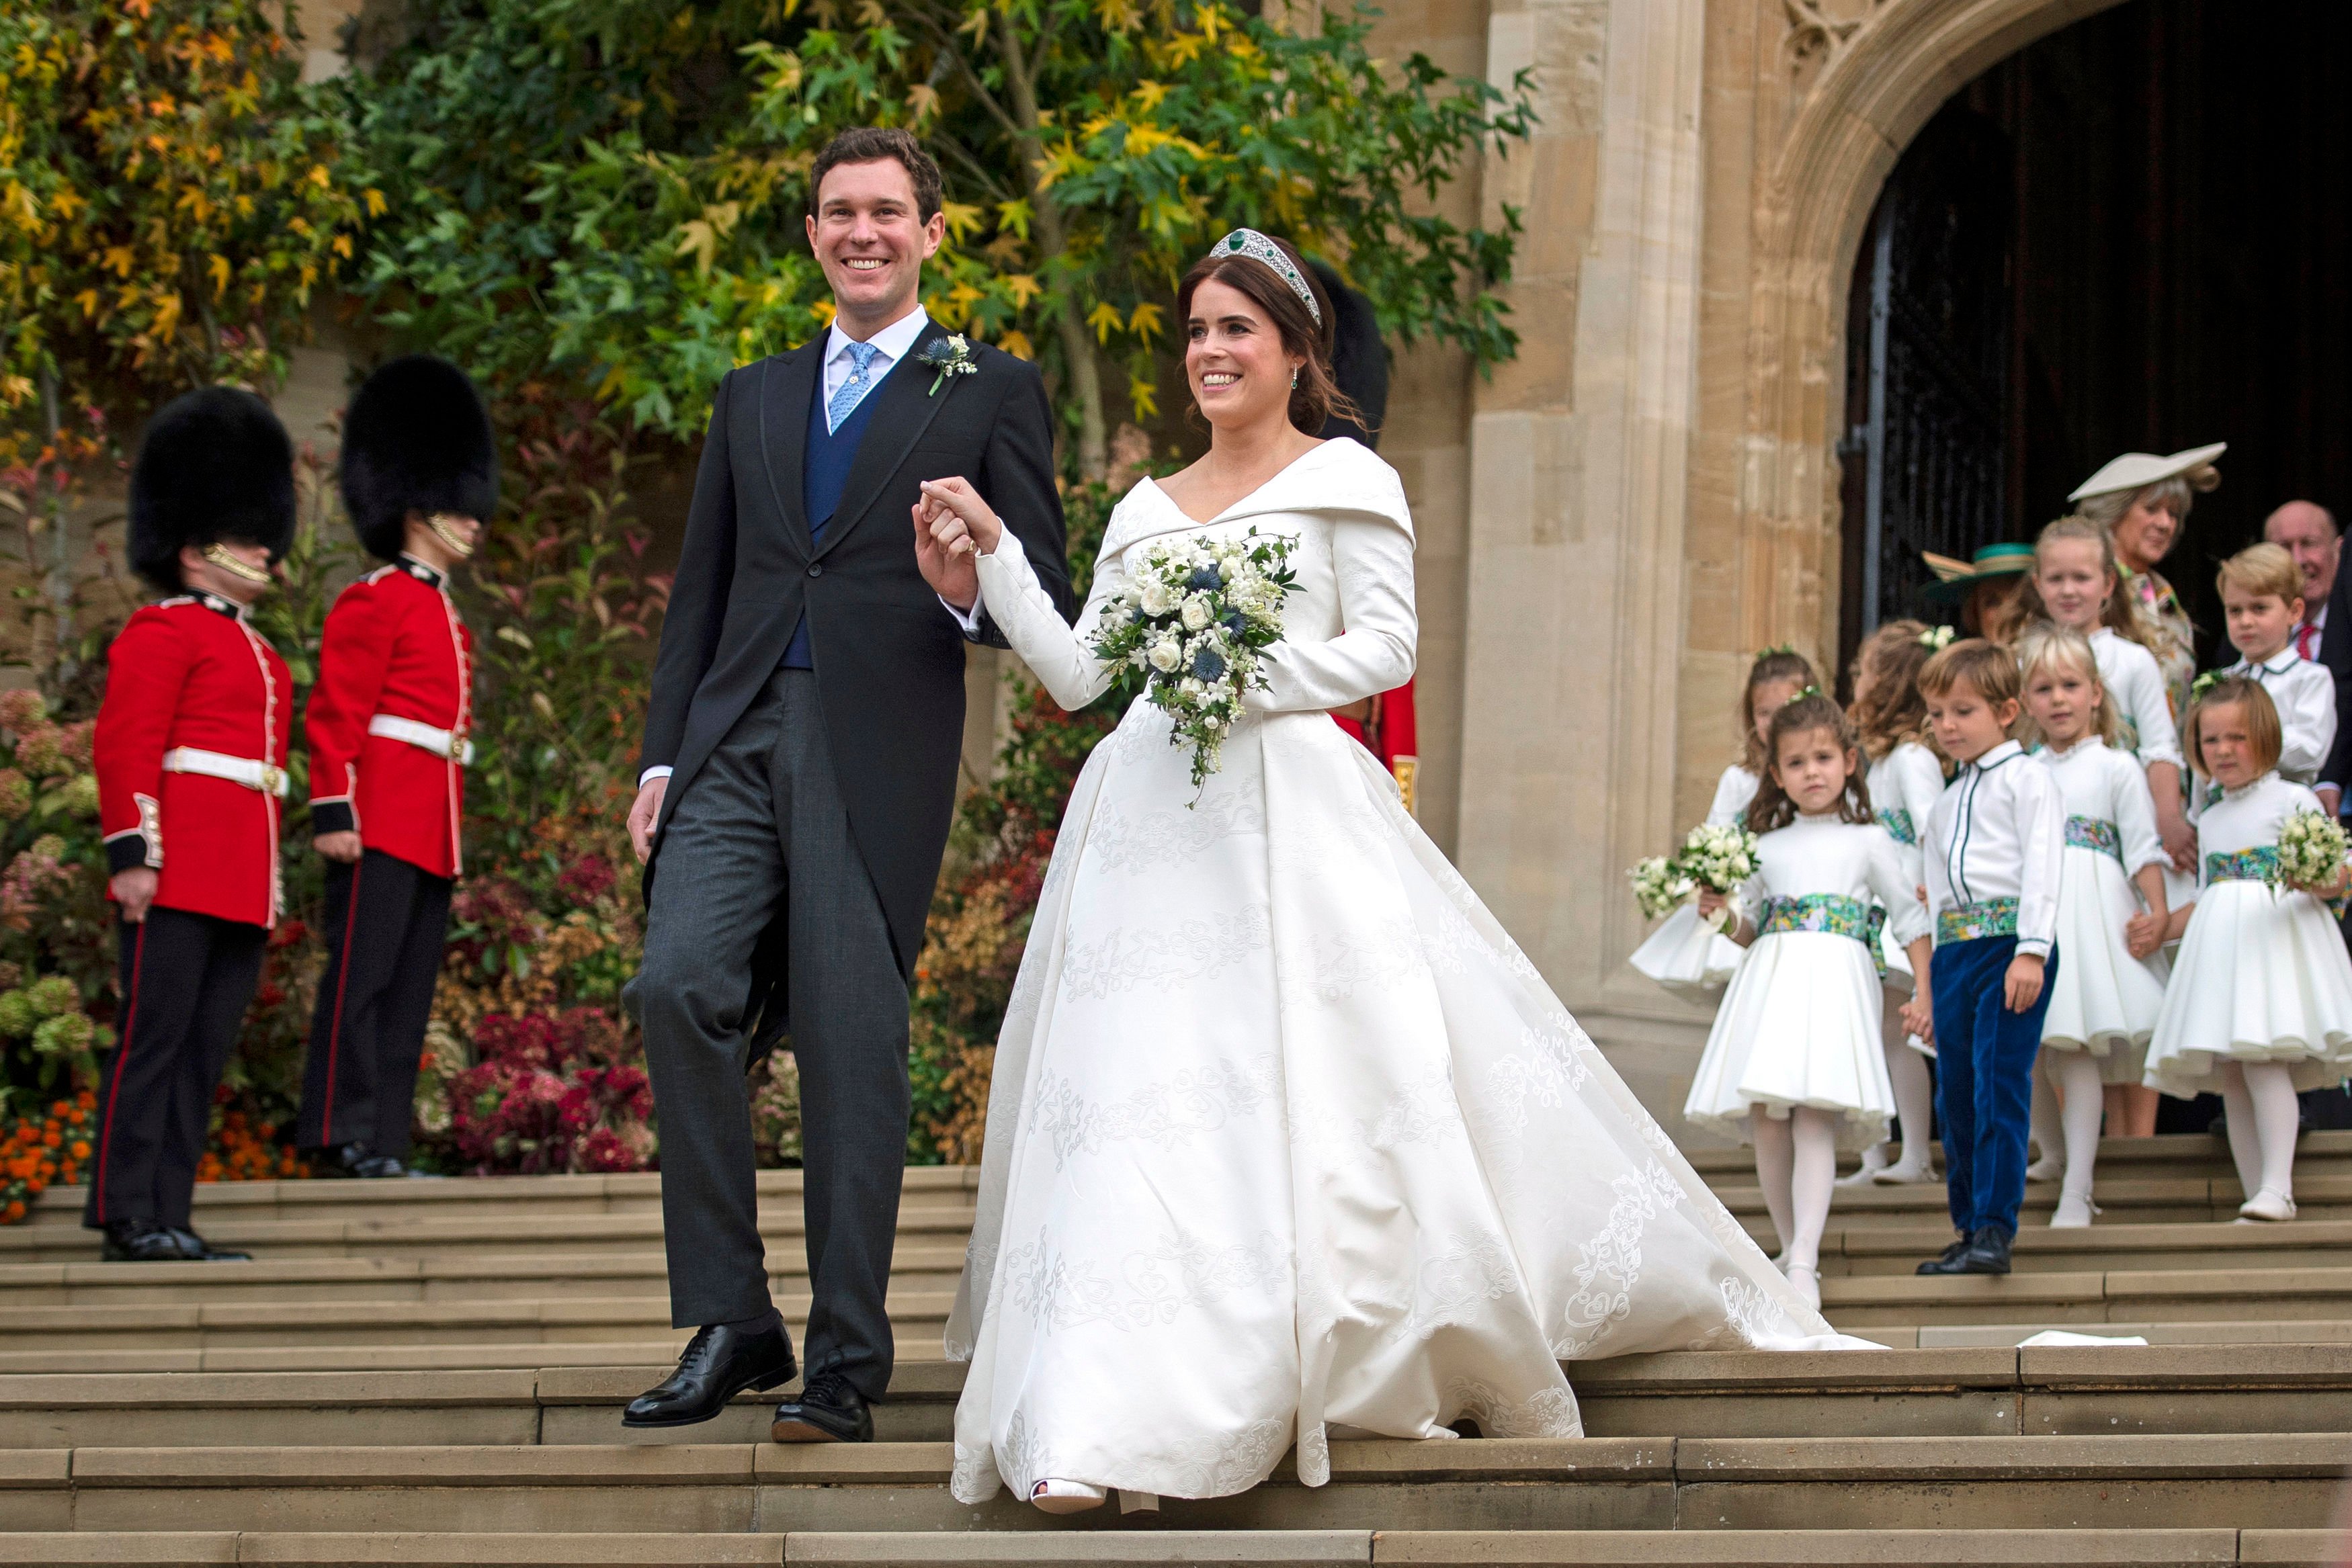 Princess Eugenie of York and Jack Brooksbank leave St George's Chapel in Windsor Castle following their wedding